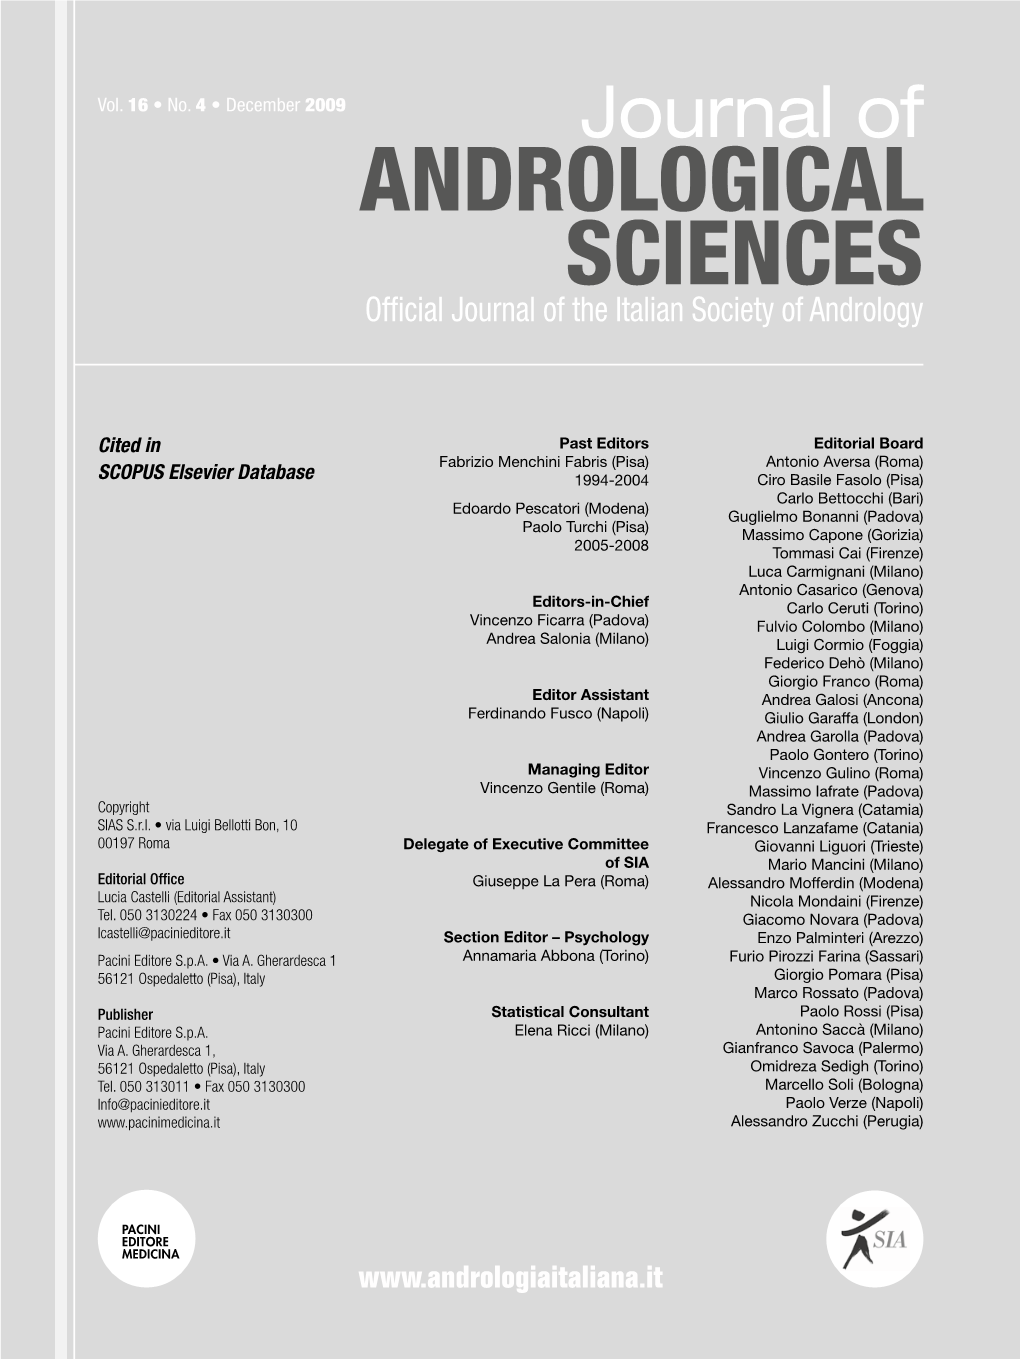 Andrological Sciences Official Journal of the Italian Society of Andrology